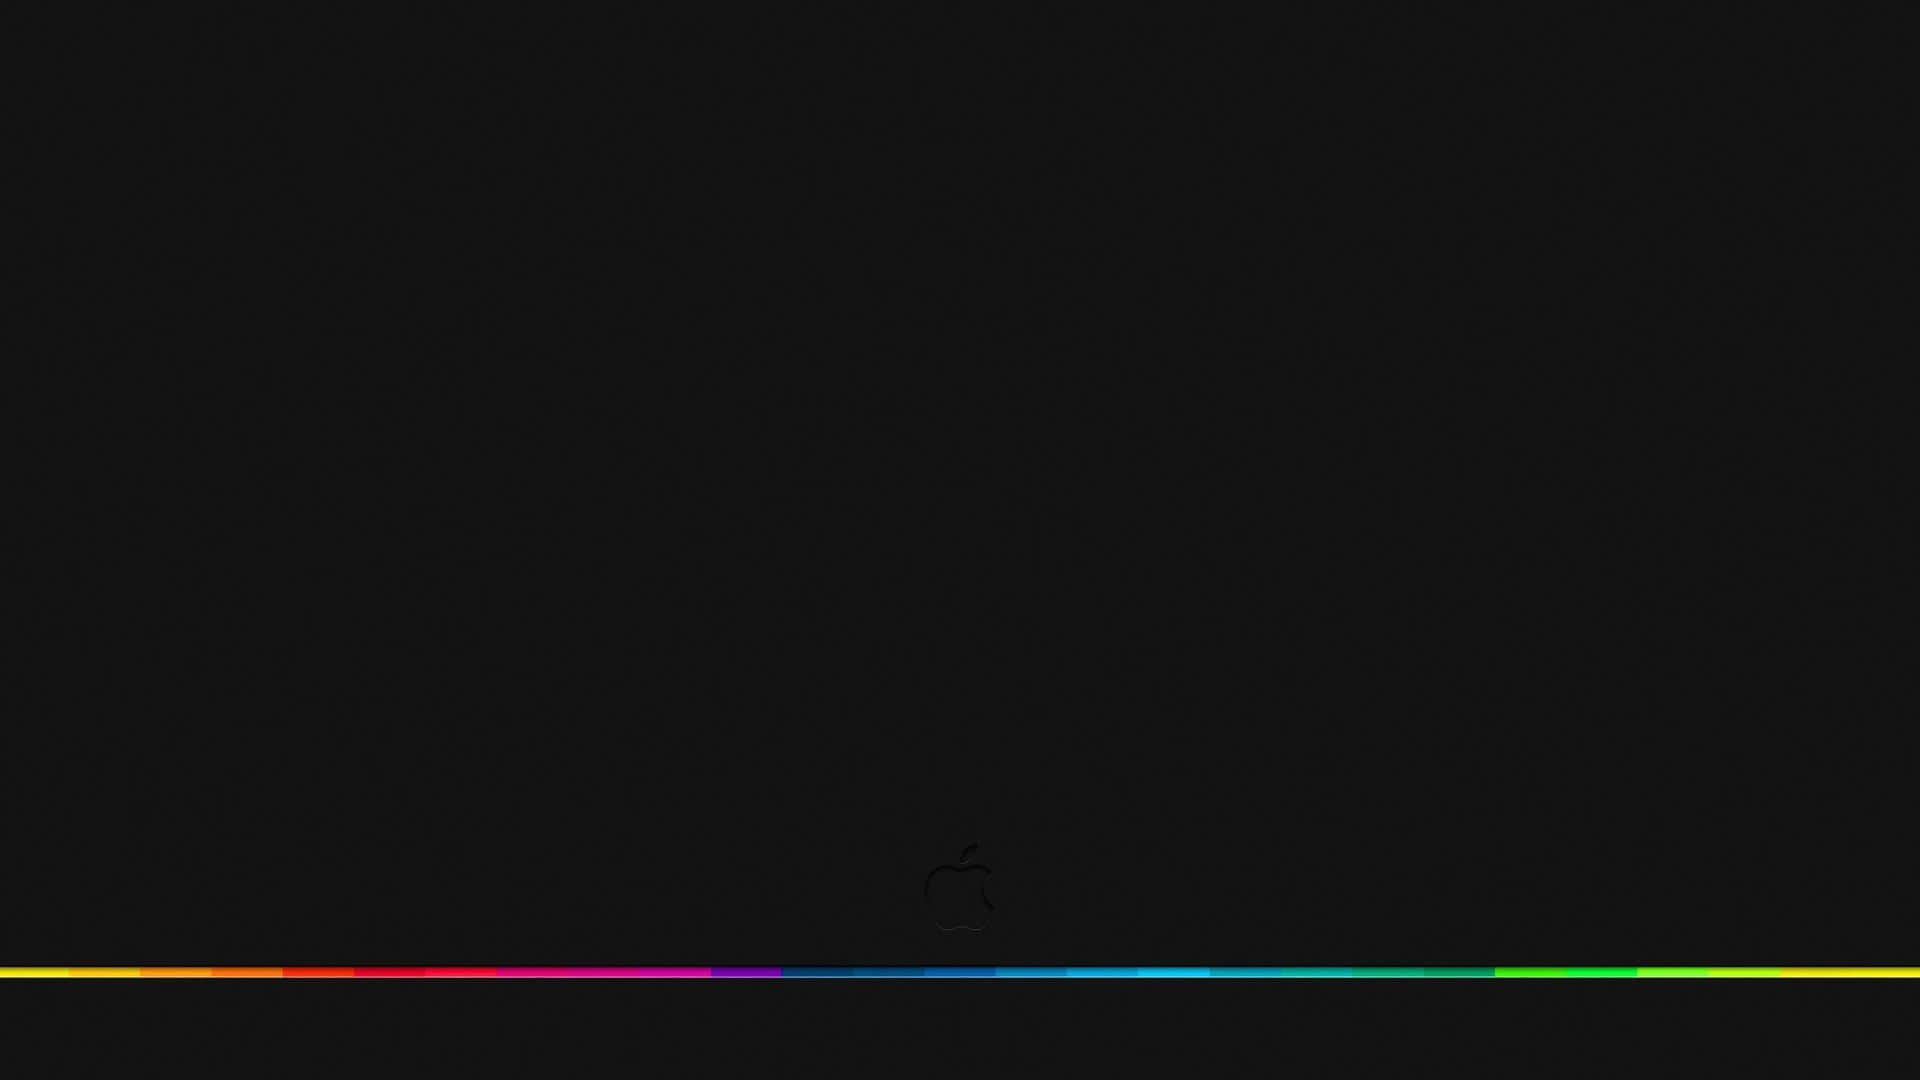 Minimalist Black Cool Display With Rainbow Colored Line Background